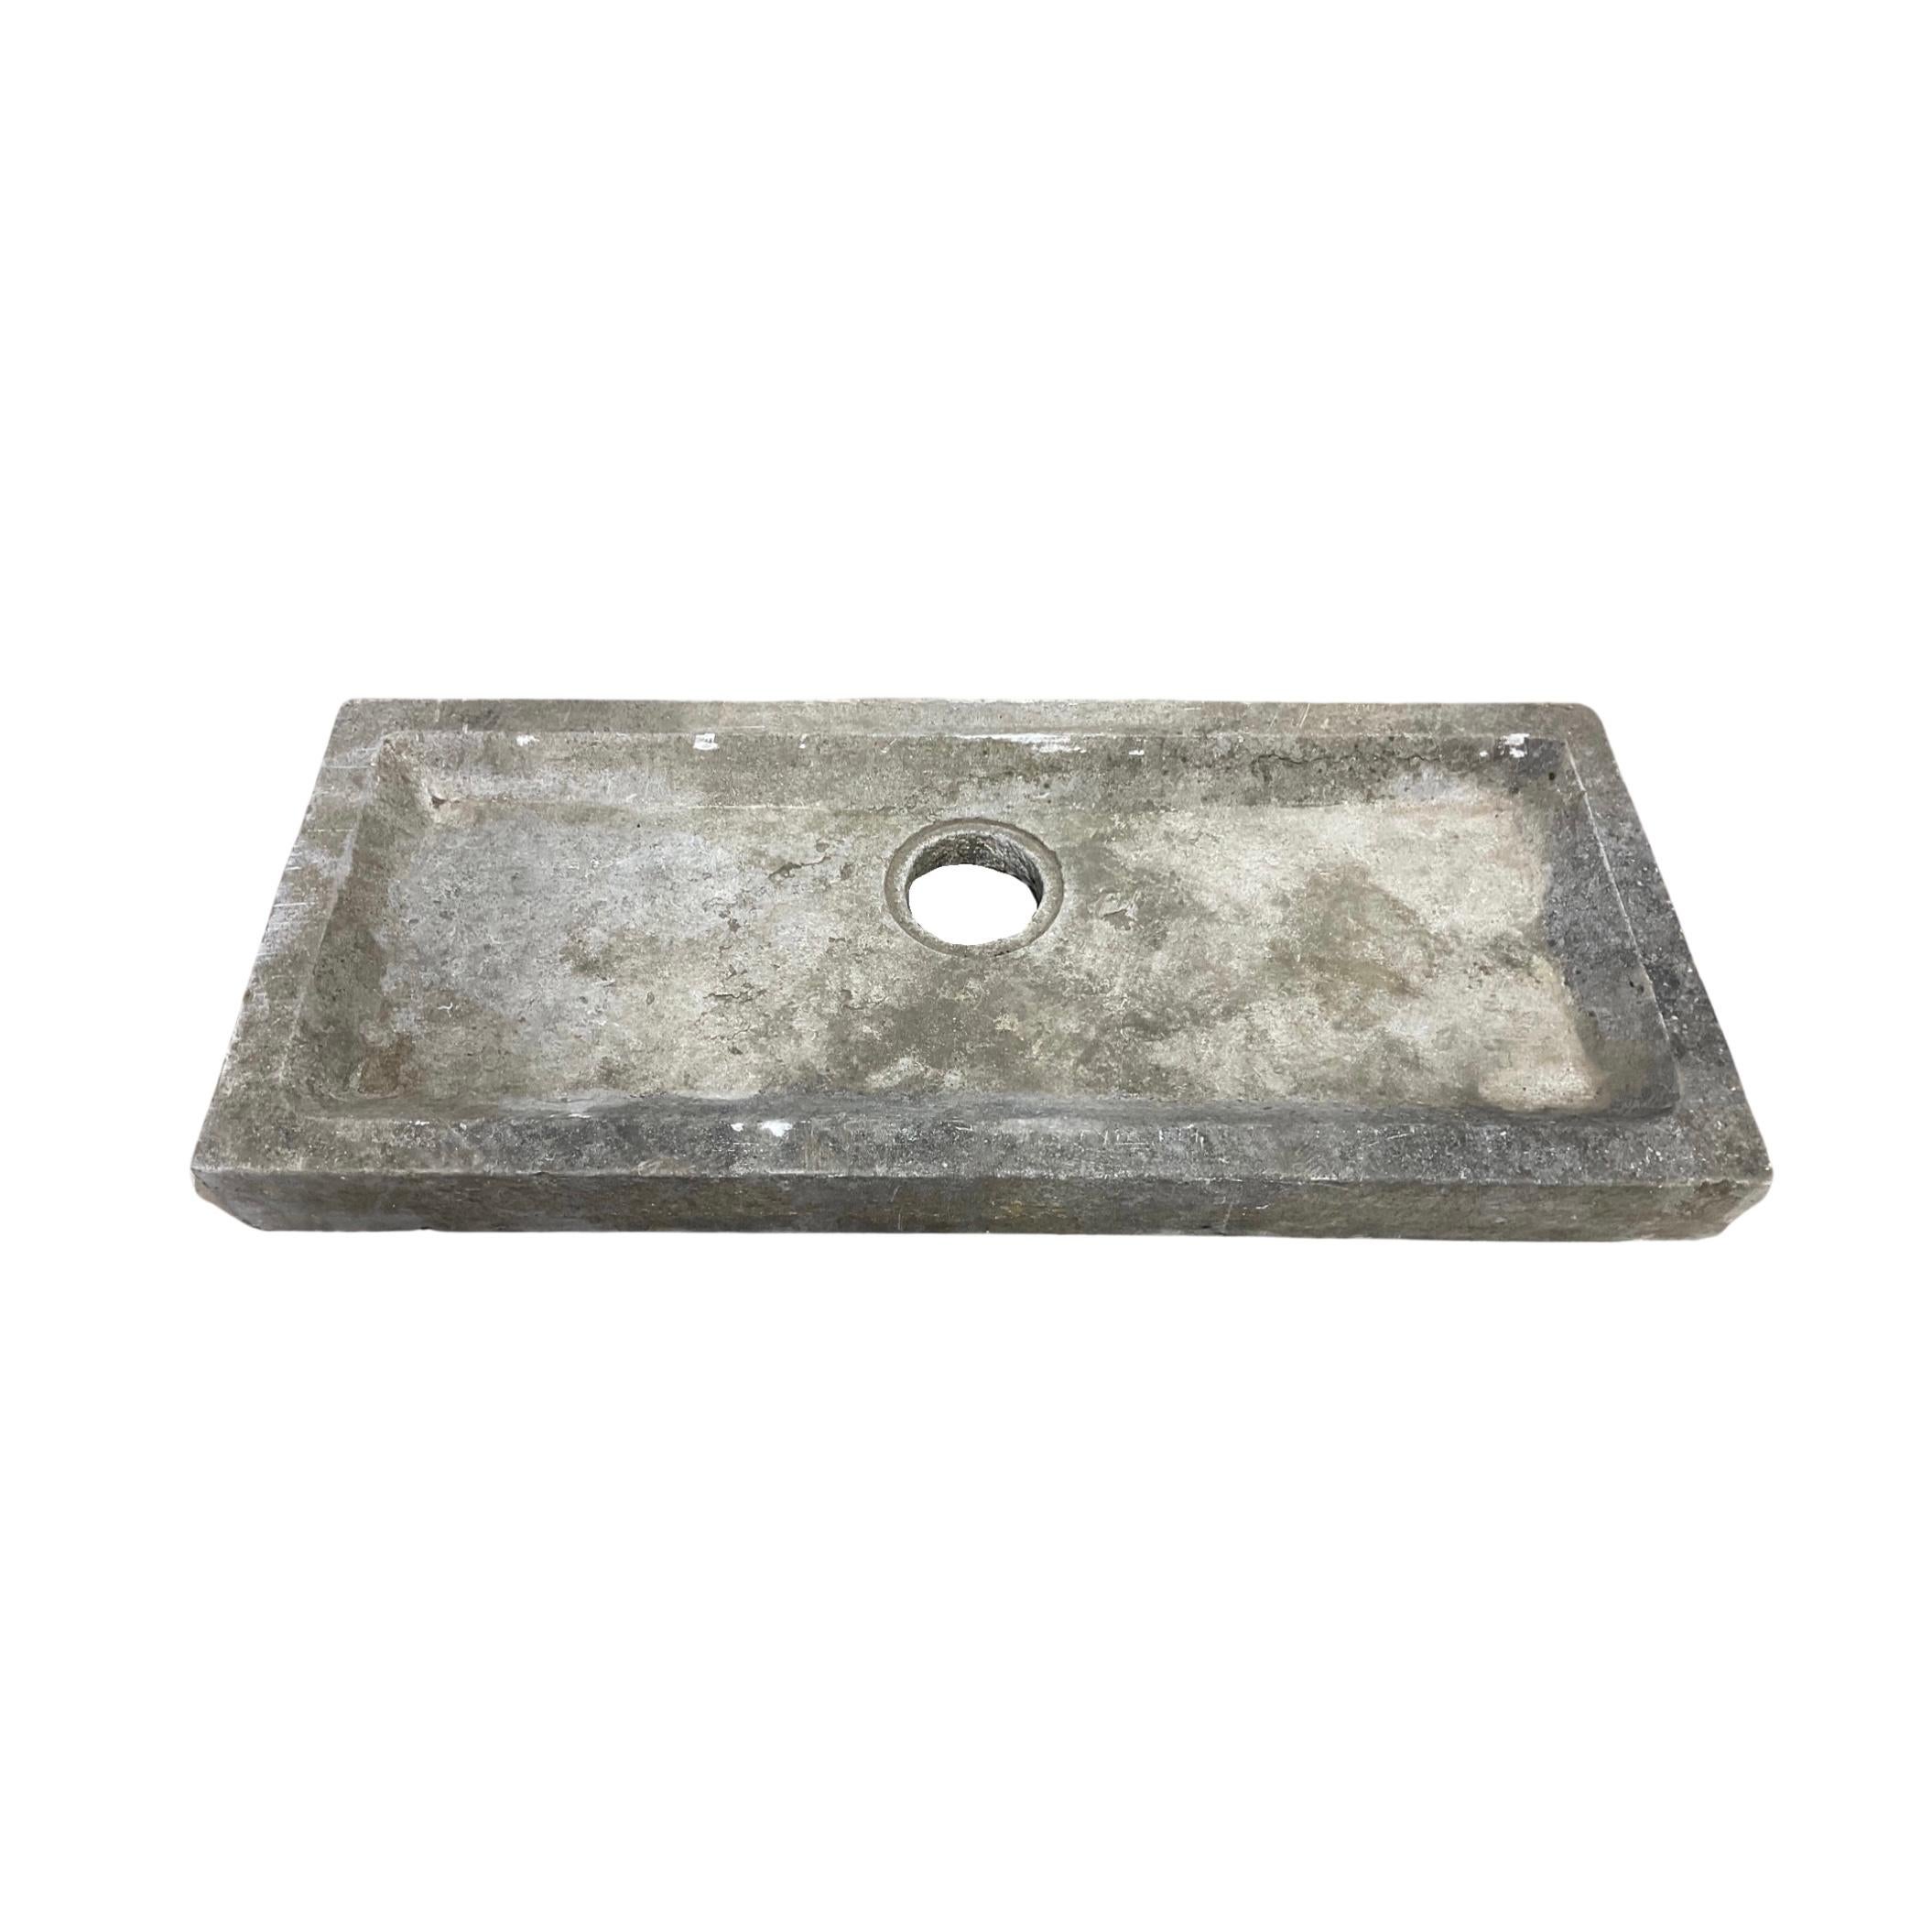 This Belgium Bluestone Sink is a unique piece. Crafted in the 18th century, it has a trough-style design of length and a circle carved for drainage. Its handmade details add an elegant design to any space.